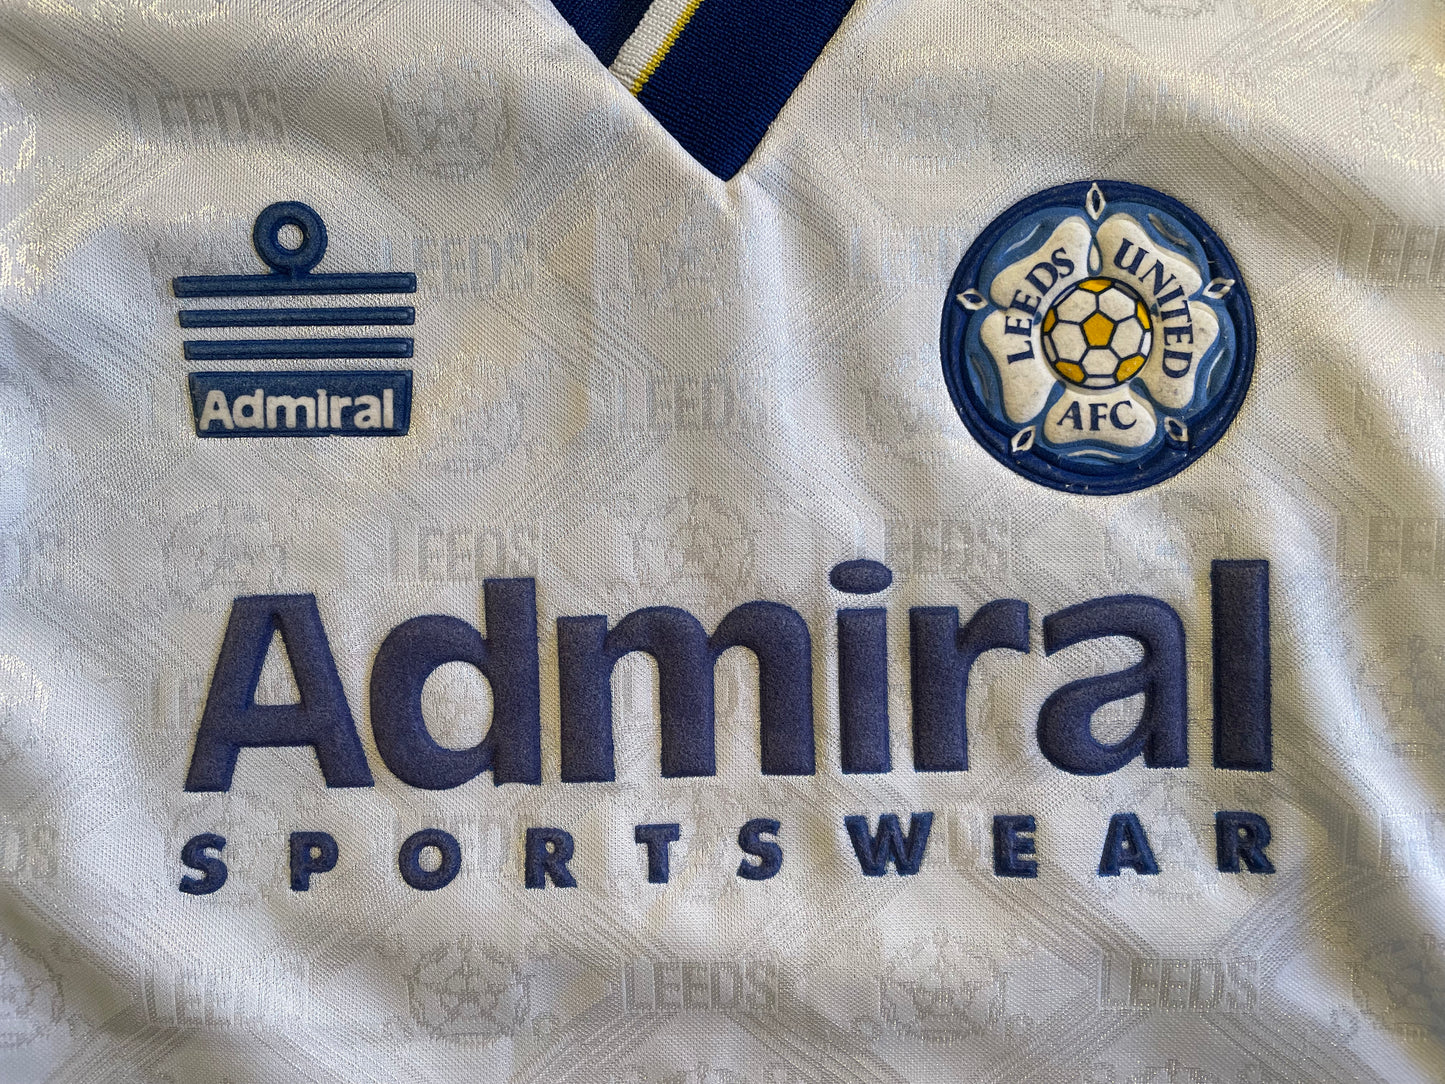 Leeds United 1992 Home Shirt (excellent) Small Boys. Height 16 inches